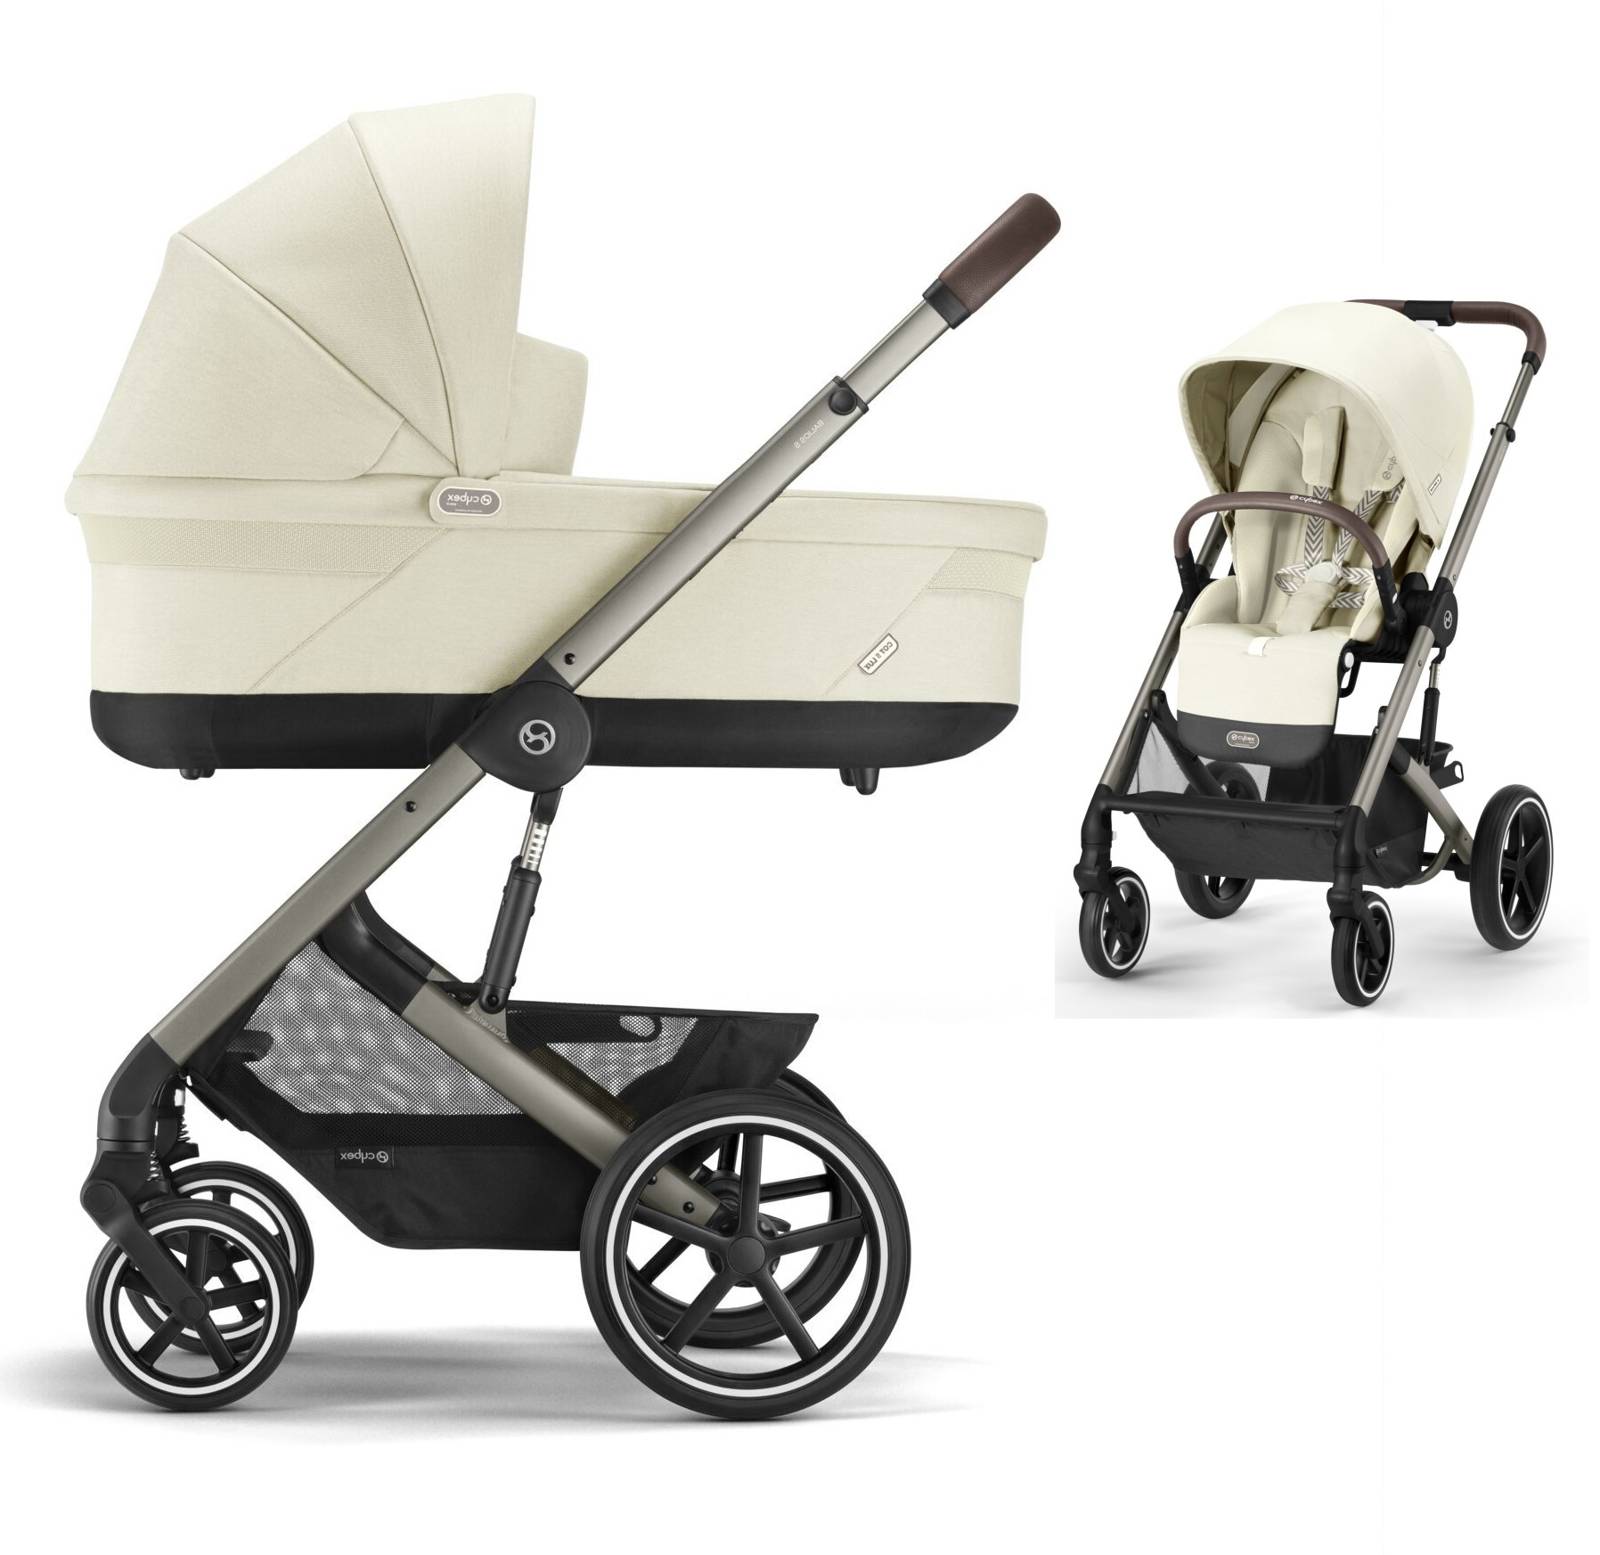 Cybex BALIOS S LUX - 2in1 pushchair with carrycot, Seashell Beige, Taupe  frame Seashell Beigr, Prams